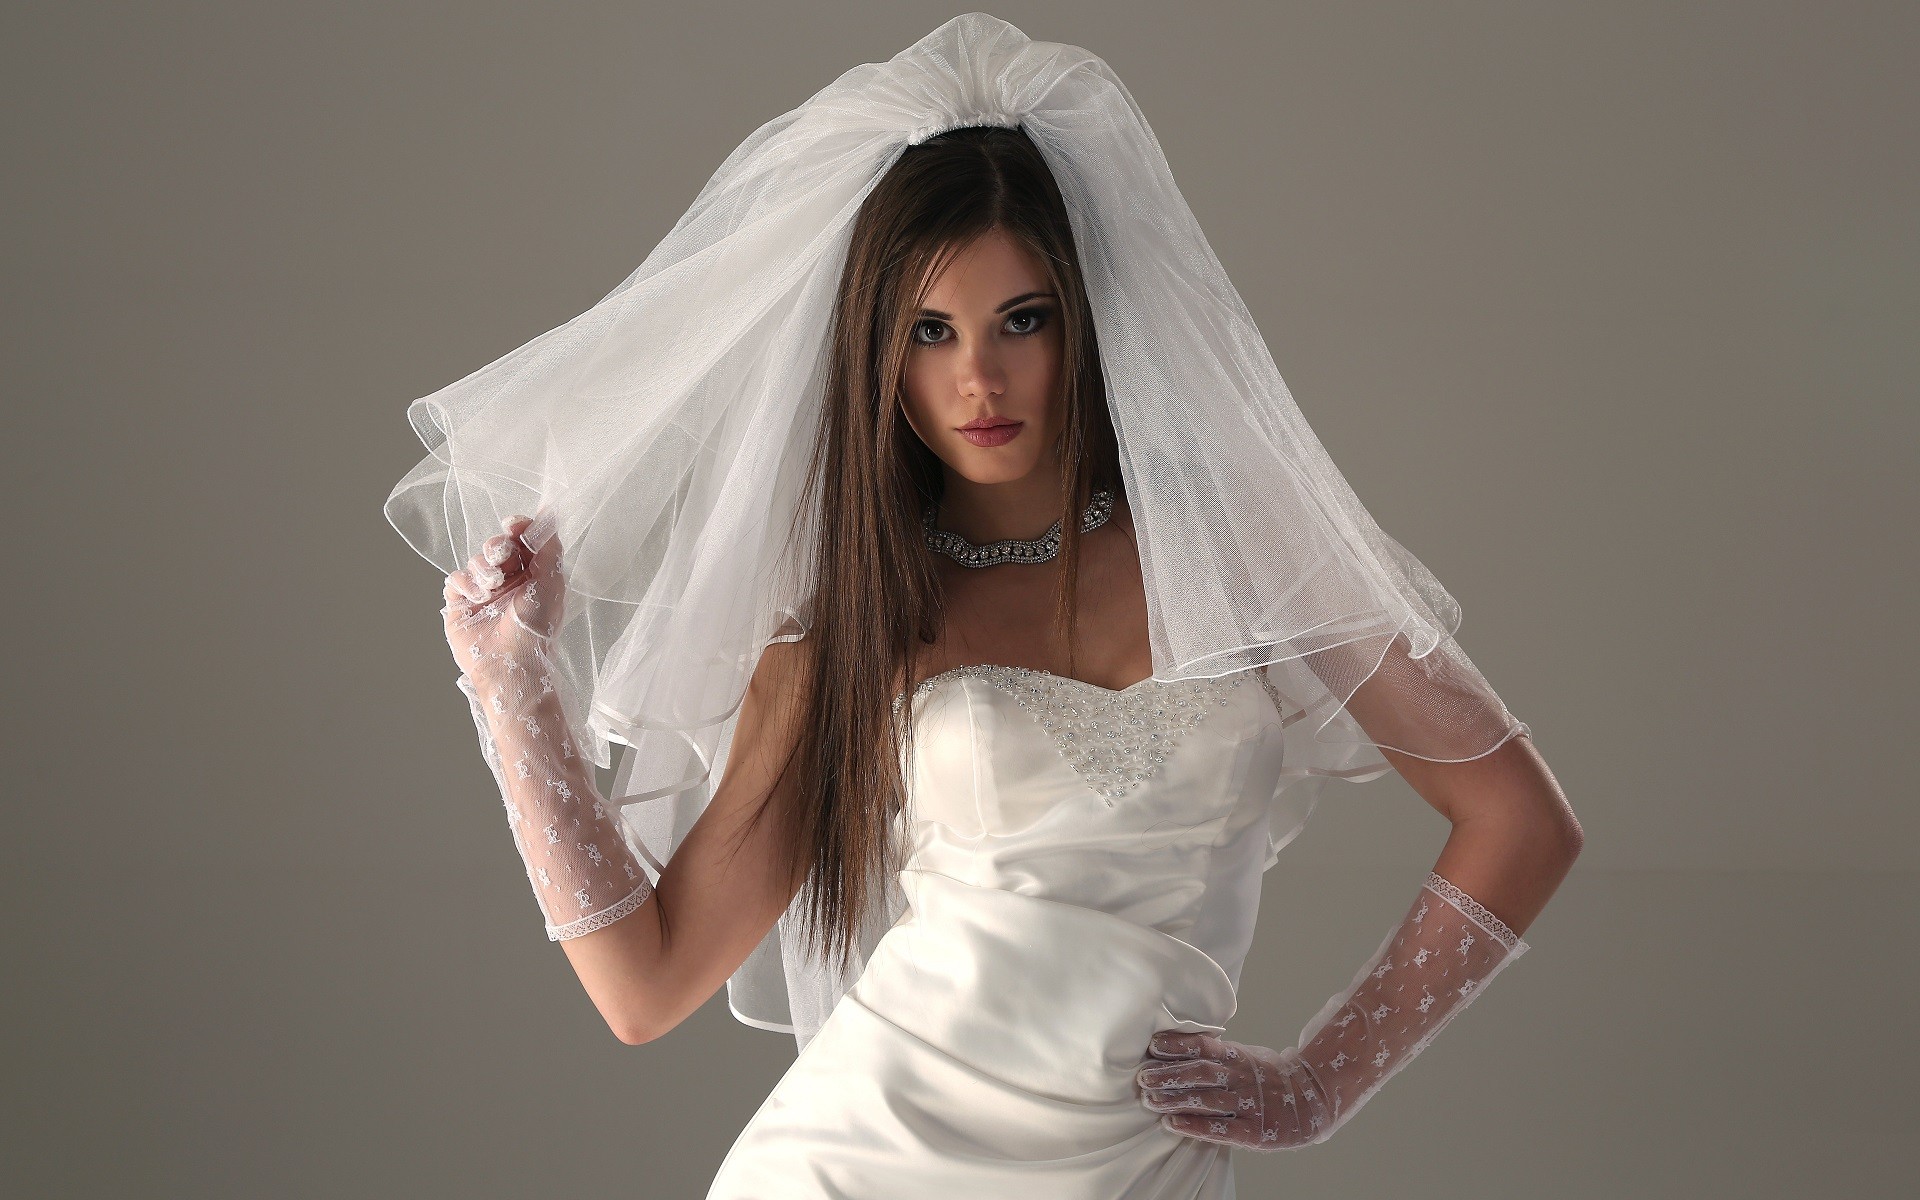 Wedding Dresses With Veils Wallpapers - Wallpaper Cave